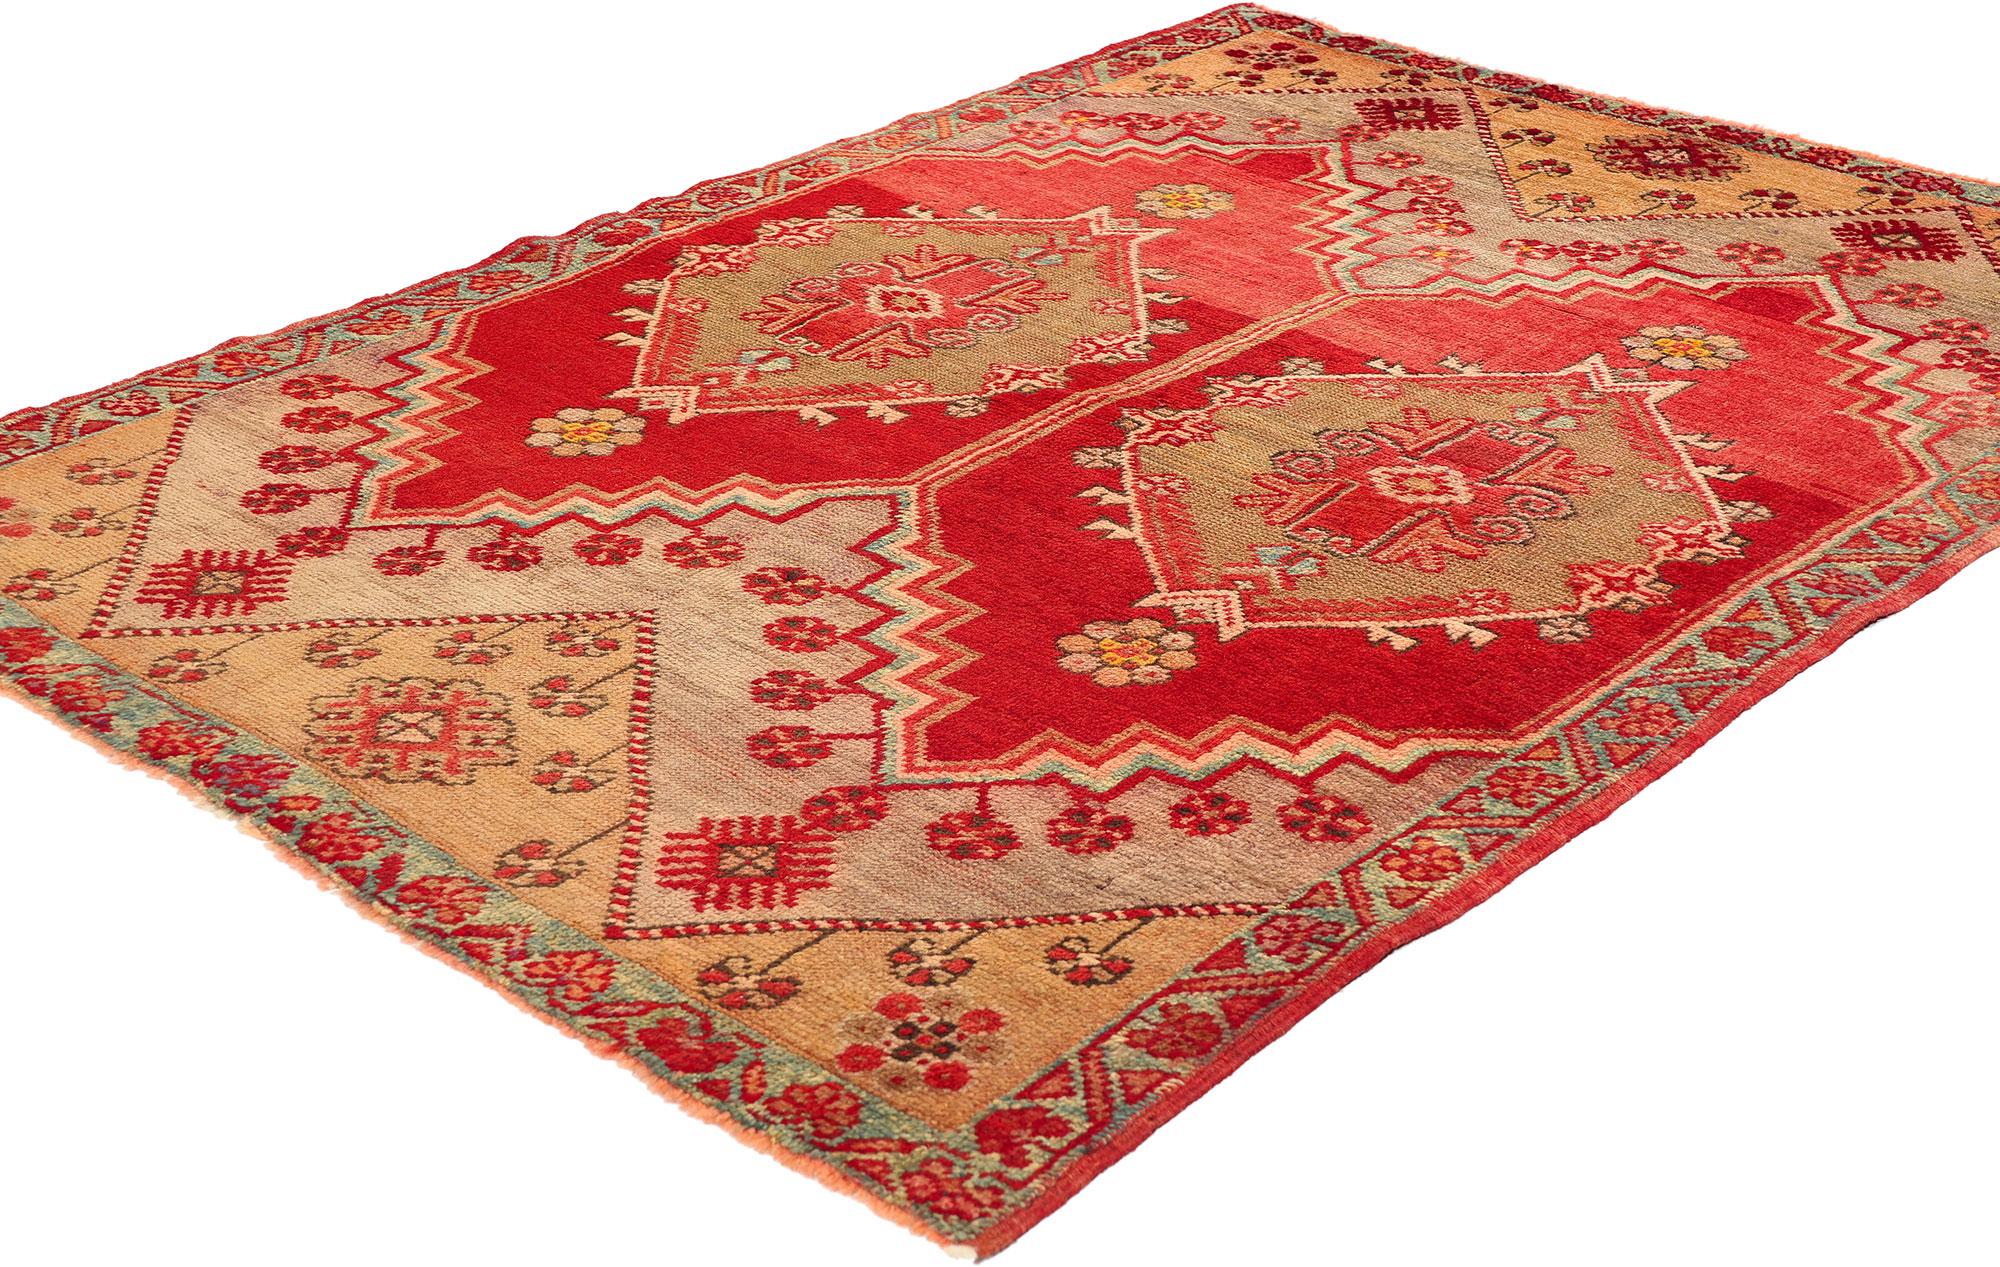 51123 Vintage Red Turkish Oushak Rug, 03'07 X 04'11. Please note this listing is for one piece; it does have a matching piece and we have added a picture so you can see them together.
Exuding an enchanting allure reminiscent of luxurious red Italian